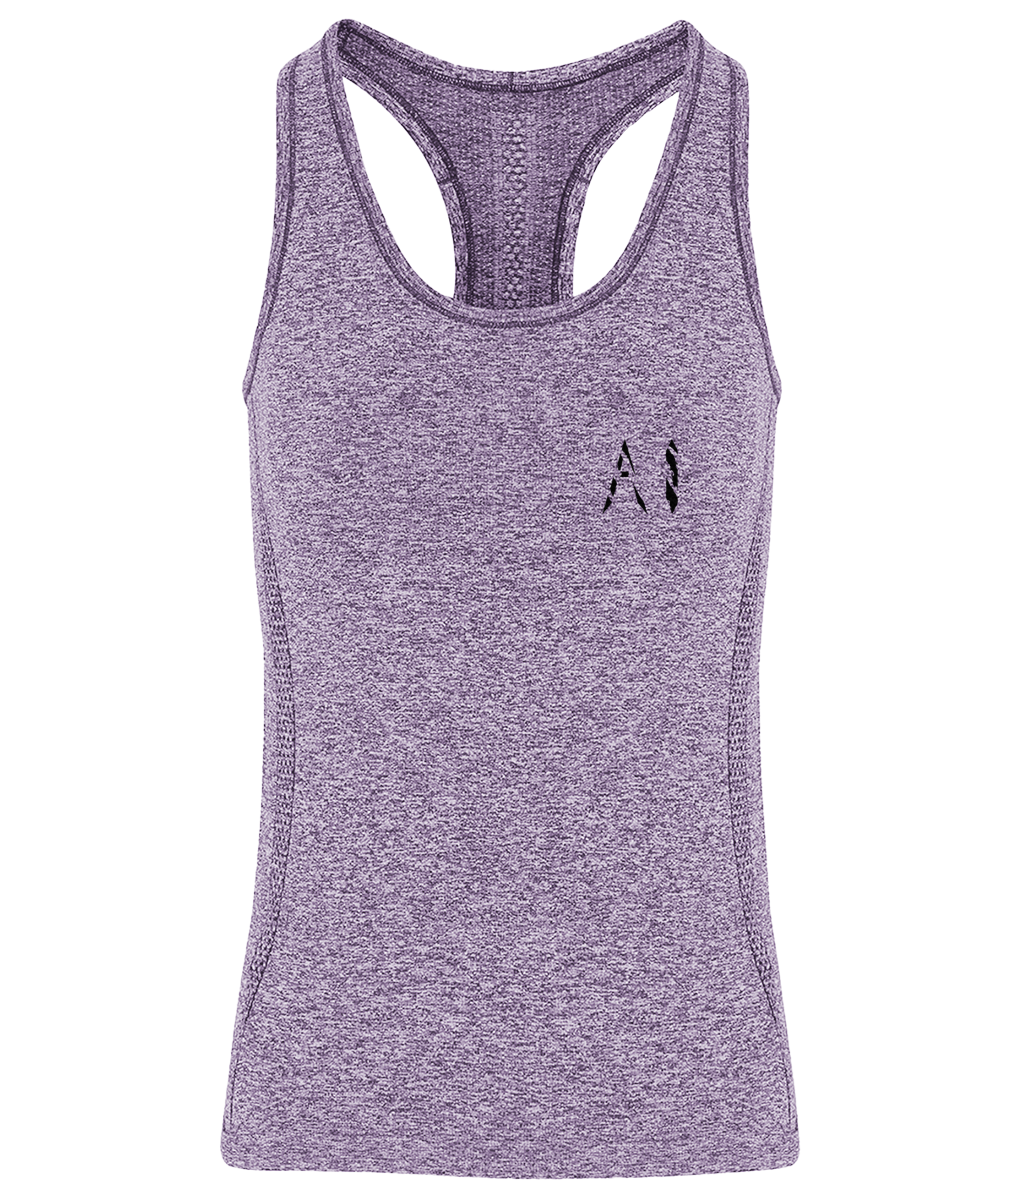 Womens purple  Athletic Seamless Sports Vest with Black AI logo on left breast